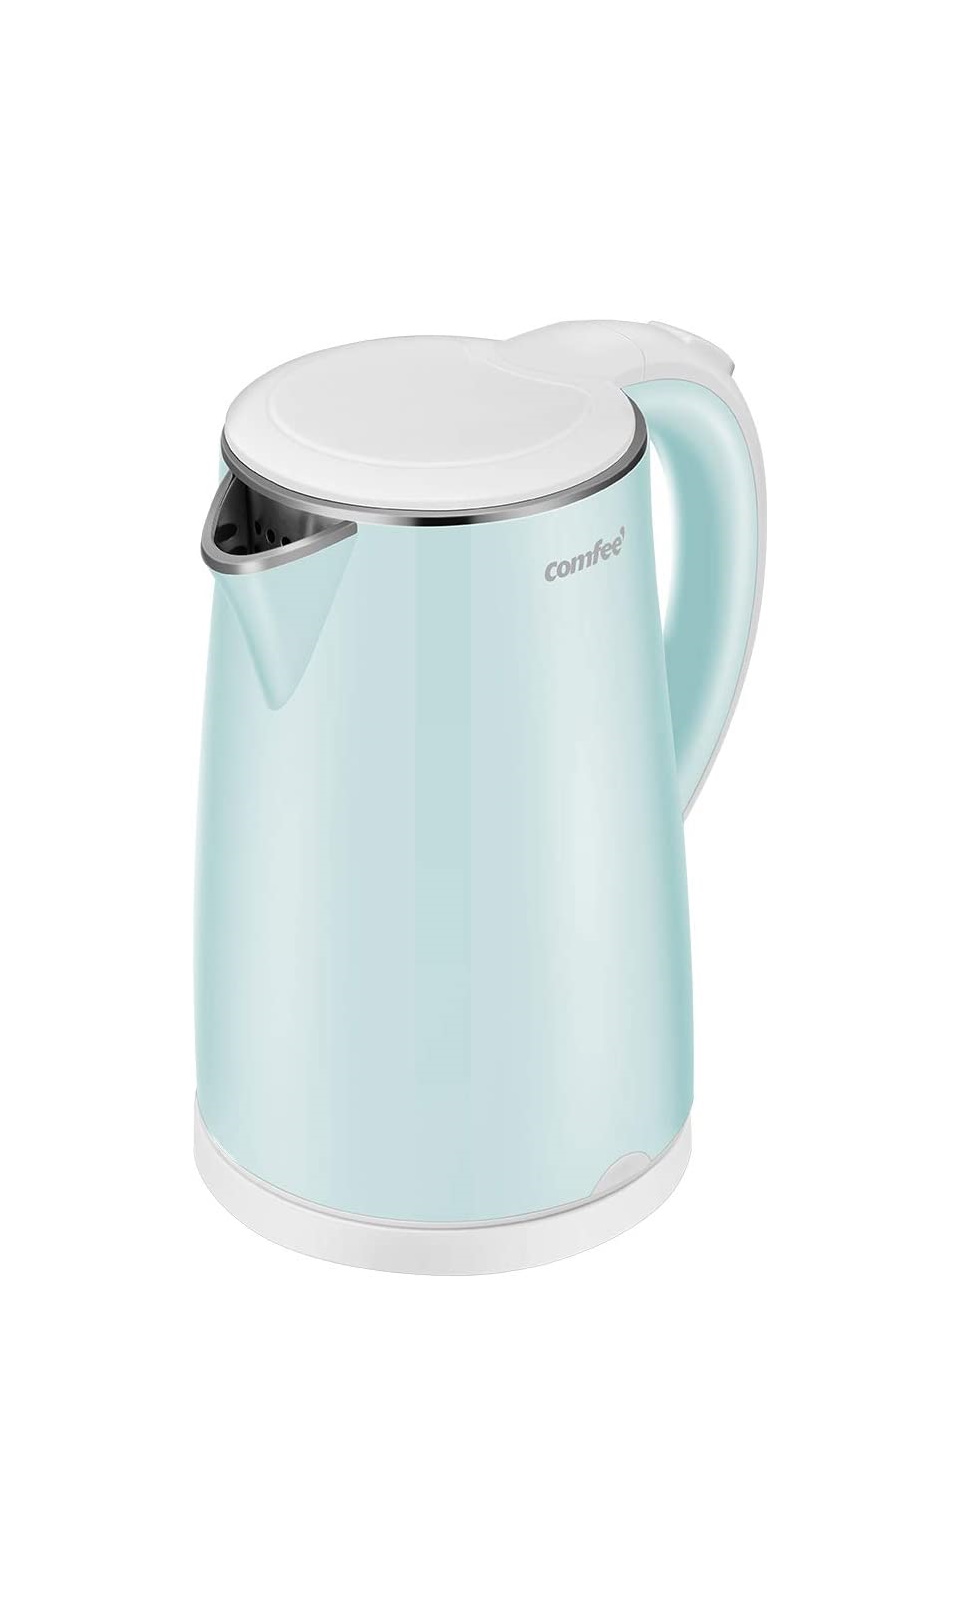 COMFEE' Electric Kettle Teapot 1.7 Liter Fast Water Heater Boiler 1500W BPA-Free, Quiet Boil & Cool Touch Series, Auto Shut-Off and Boil Dry Protection, 1.7L, Mint Green